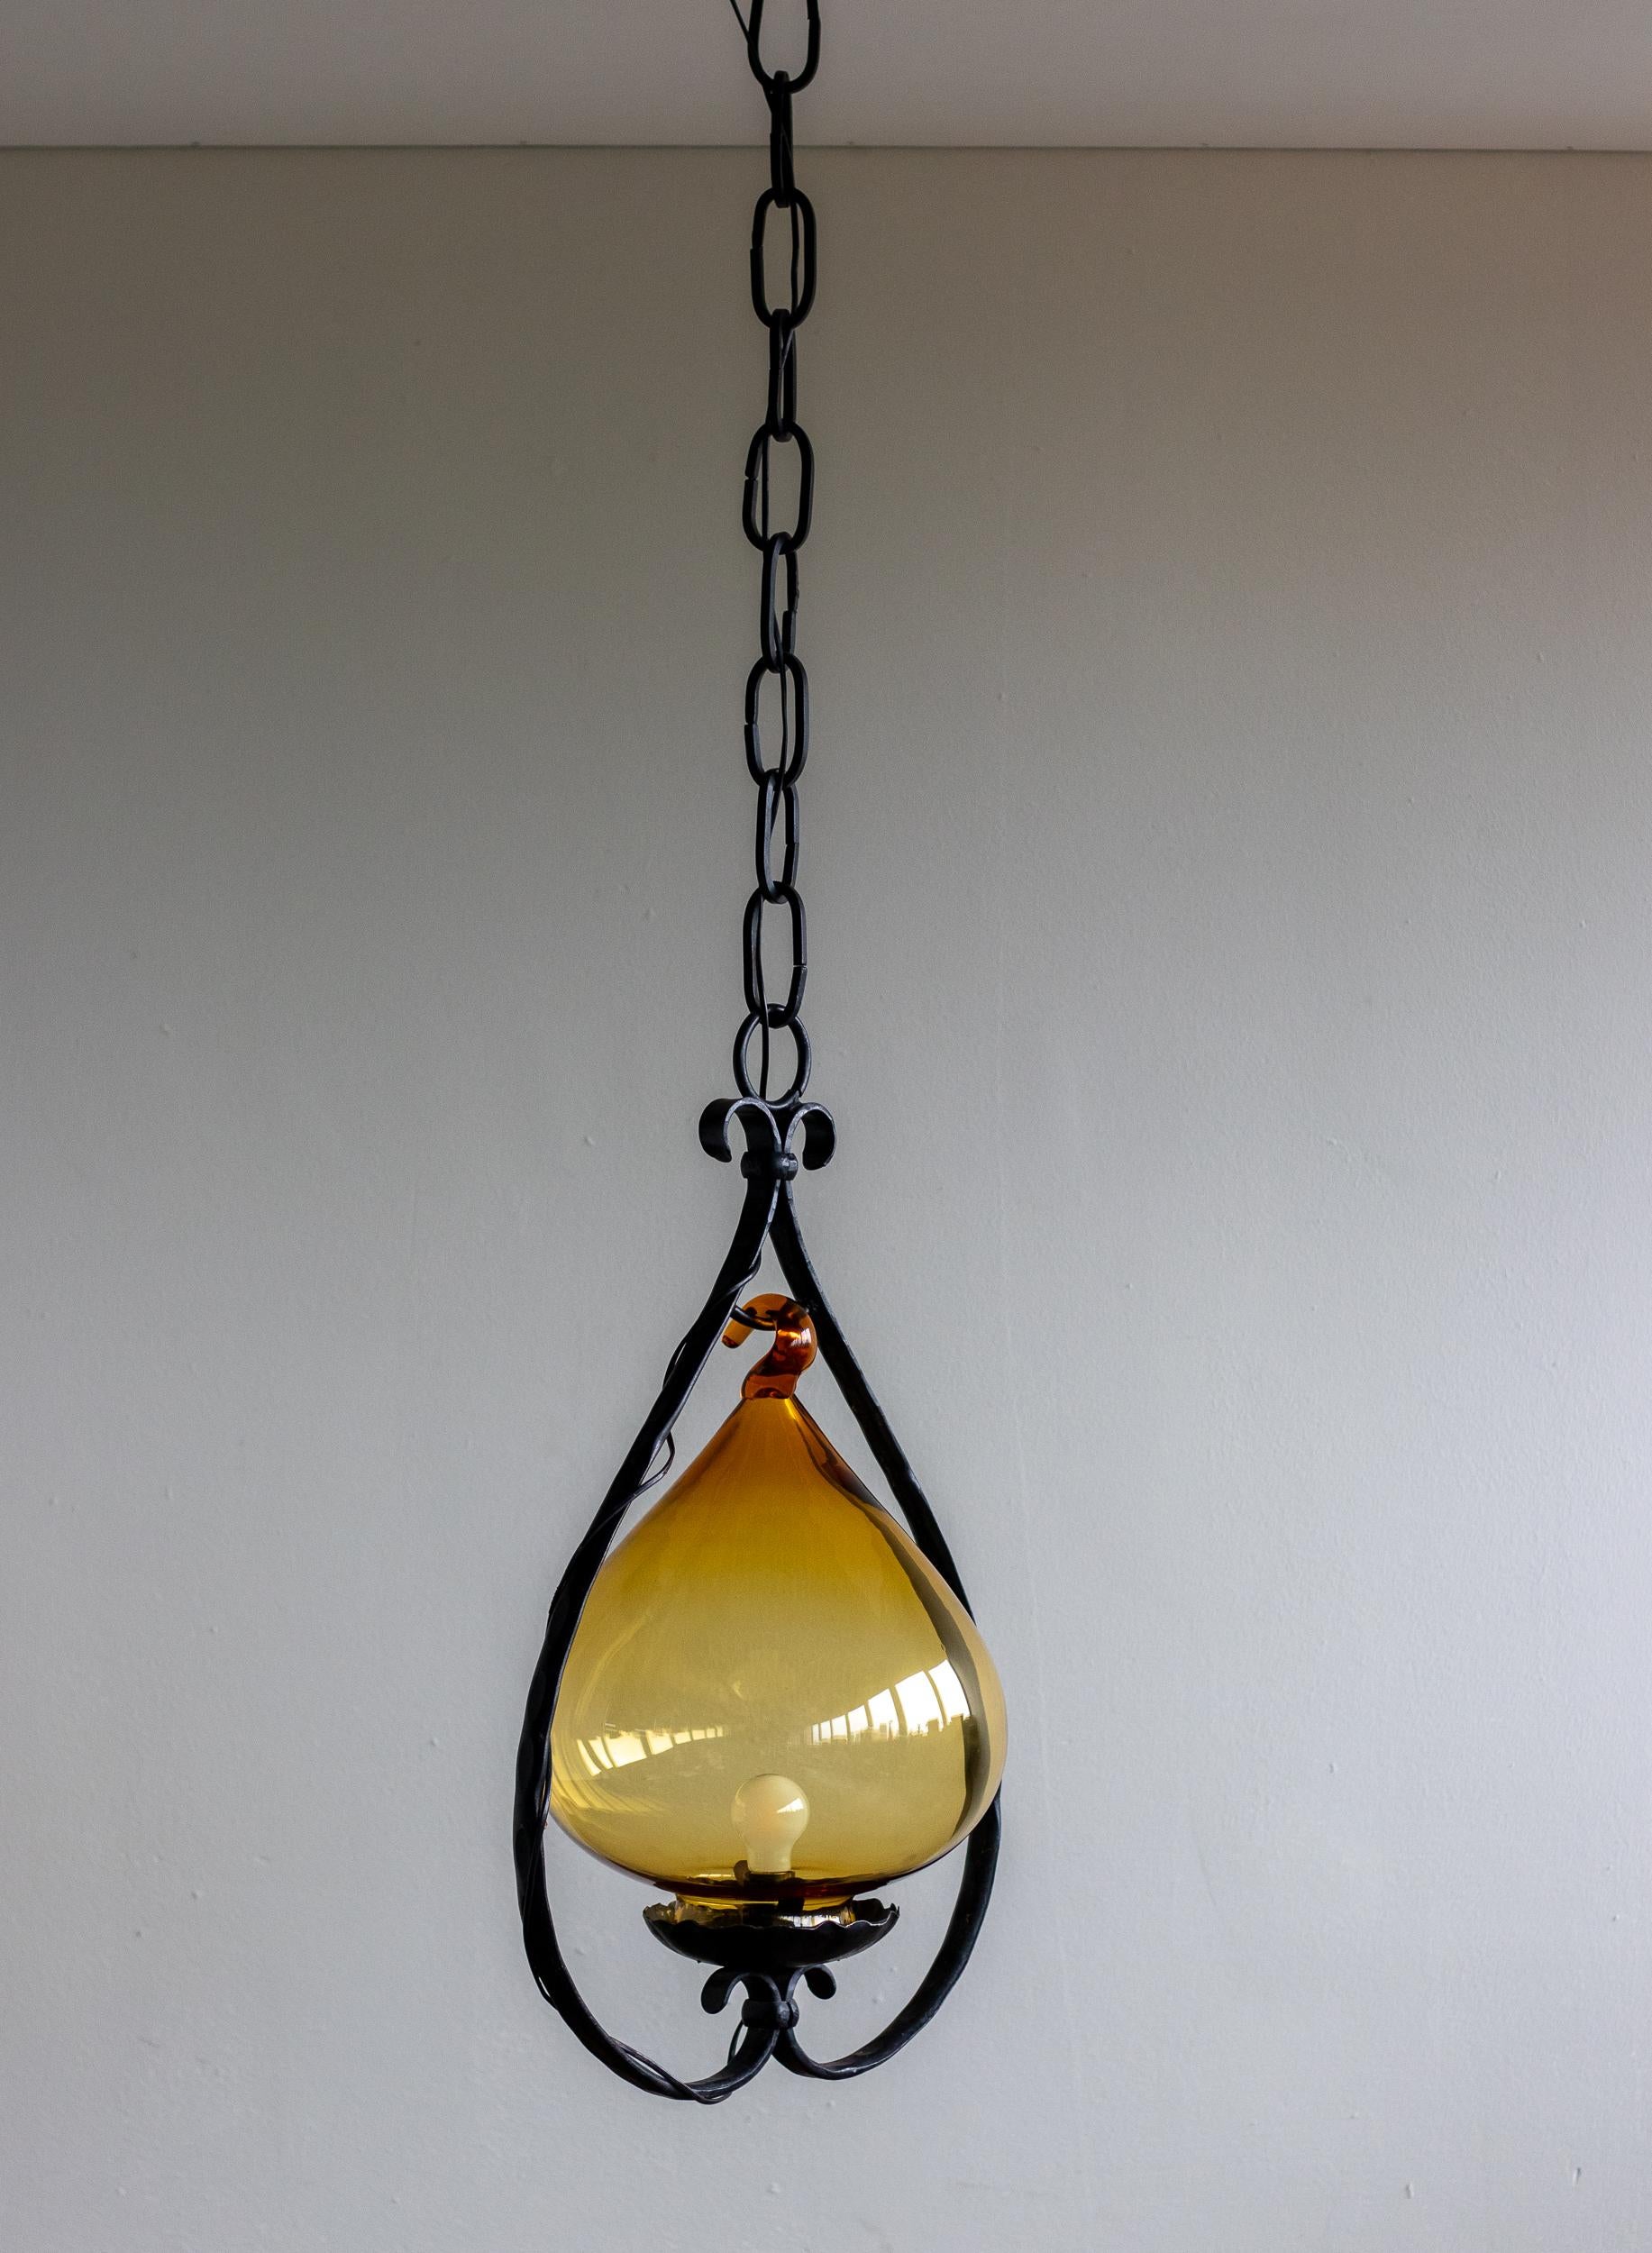 Unique vintage honey colored glass pendant attributed to Erik Hoglund. Glass shade made by Boda Nova Glassworks; wrought iron frame made by Axel Stromberg Ironworks, Sweden, circa 1957. 

Erik Höglund was a Swedish artist and designer known for